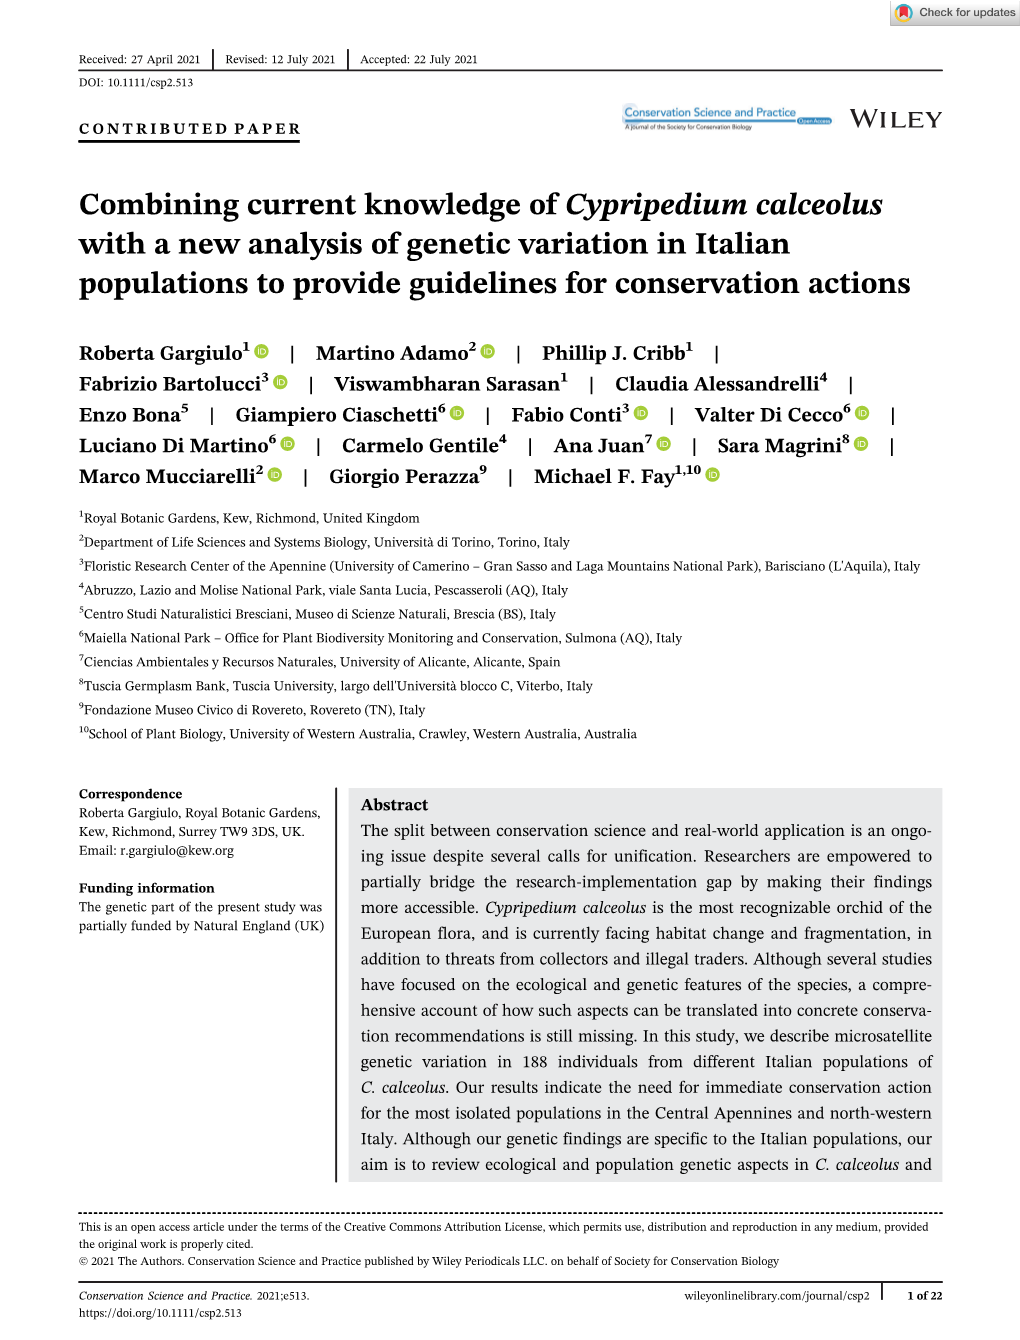 Combining Current Knowledge of Cypripedium Calceolus with a New Analysis of Genetic Variation in Italian Populations to Provide Guidelines for Conservation Actions